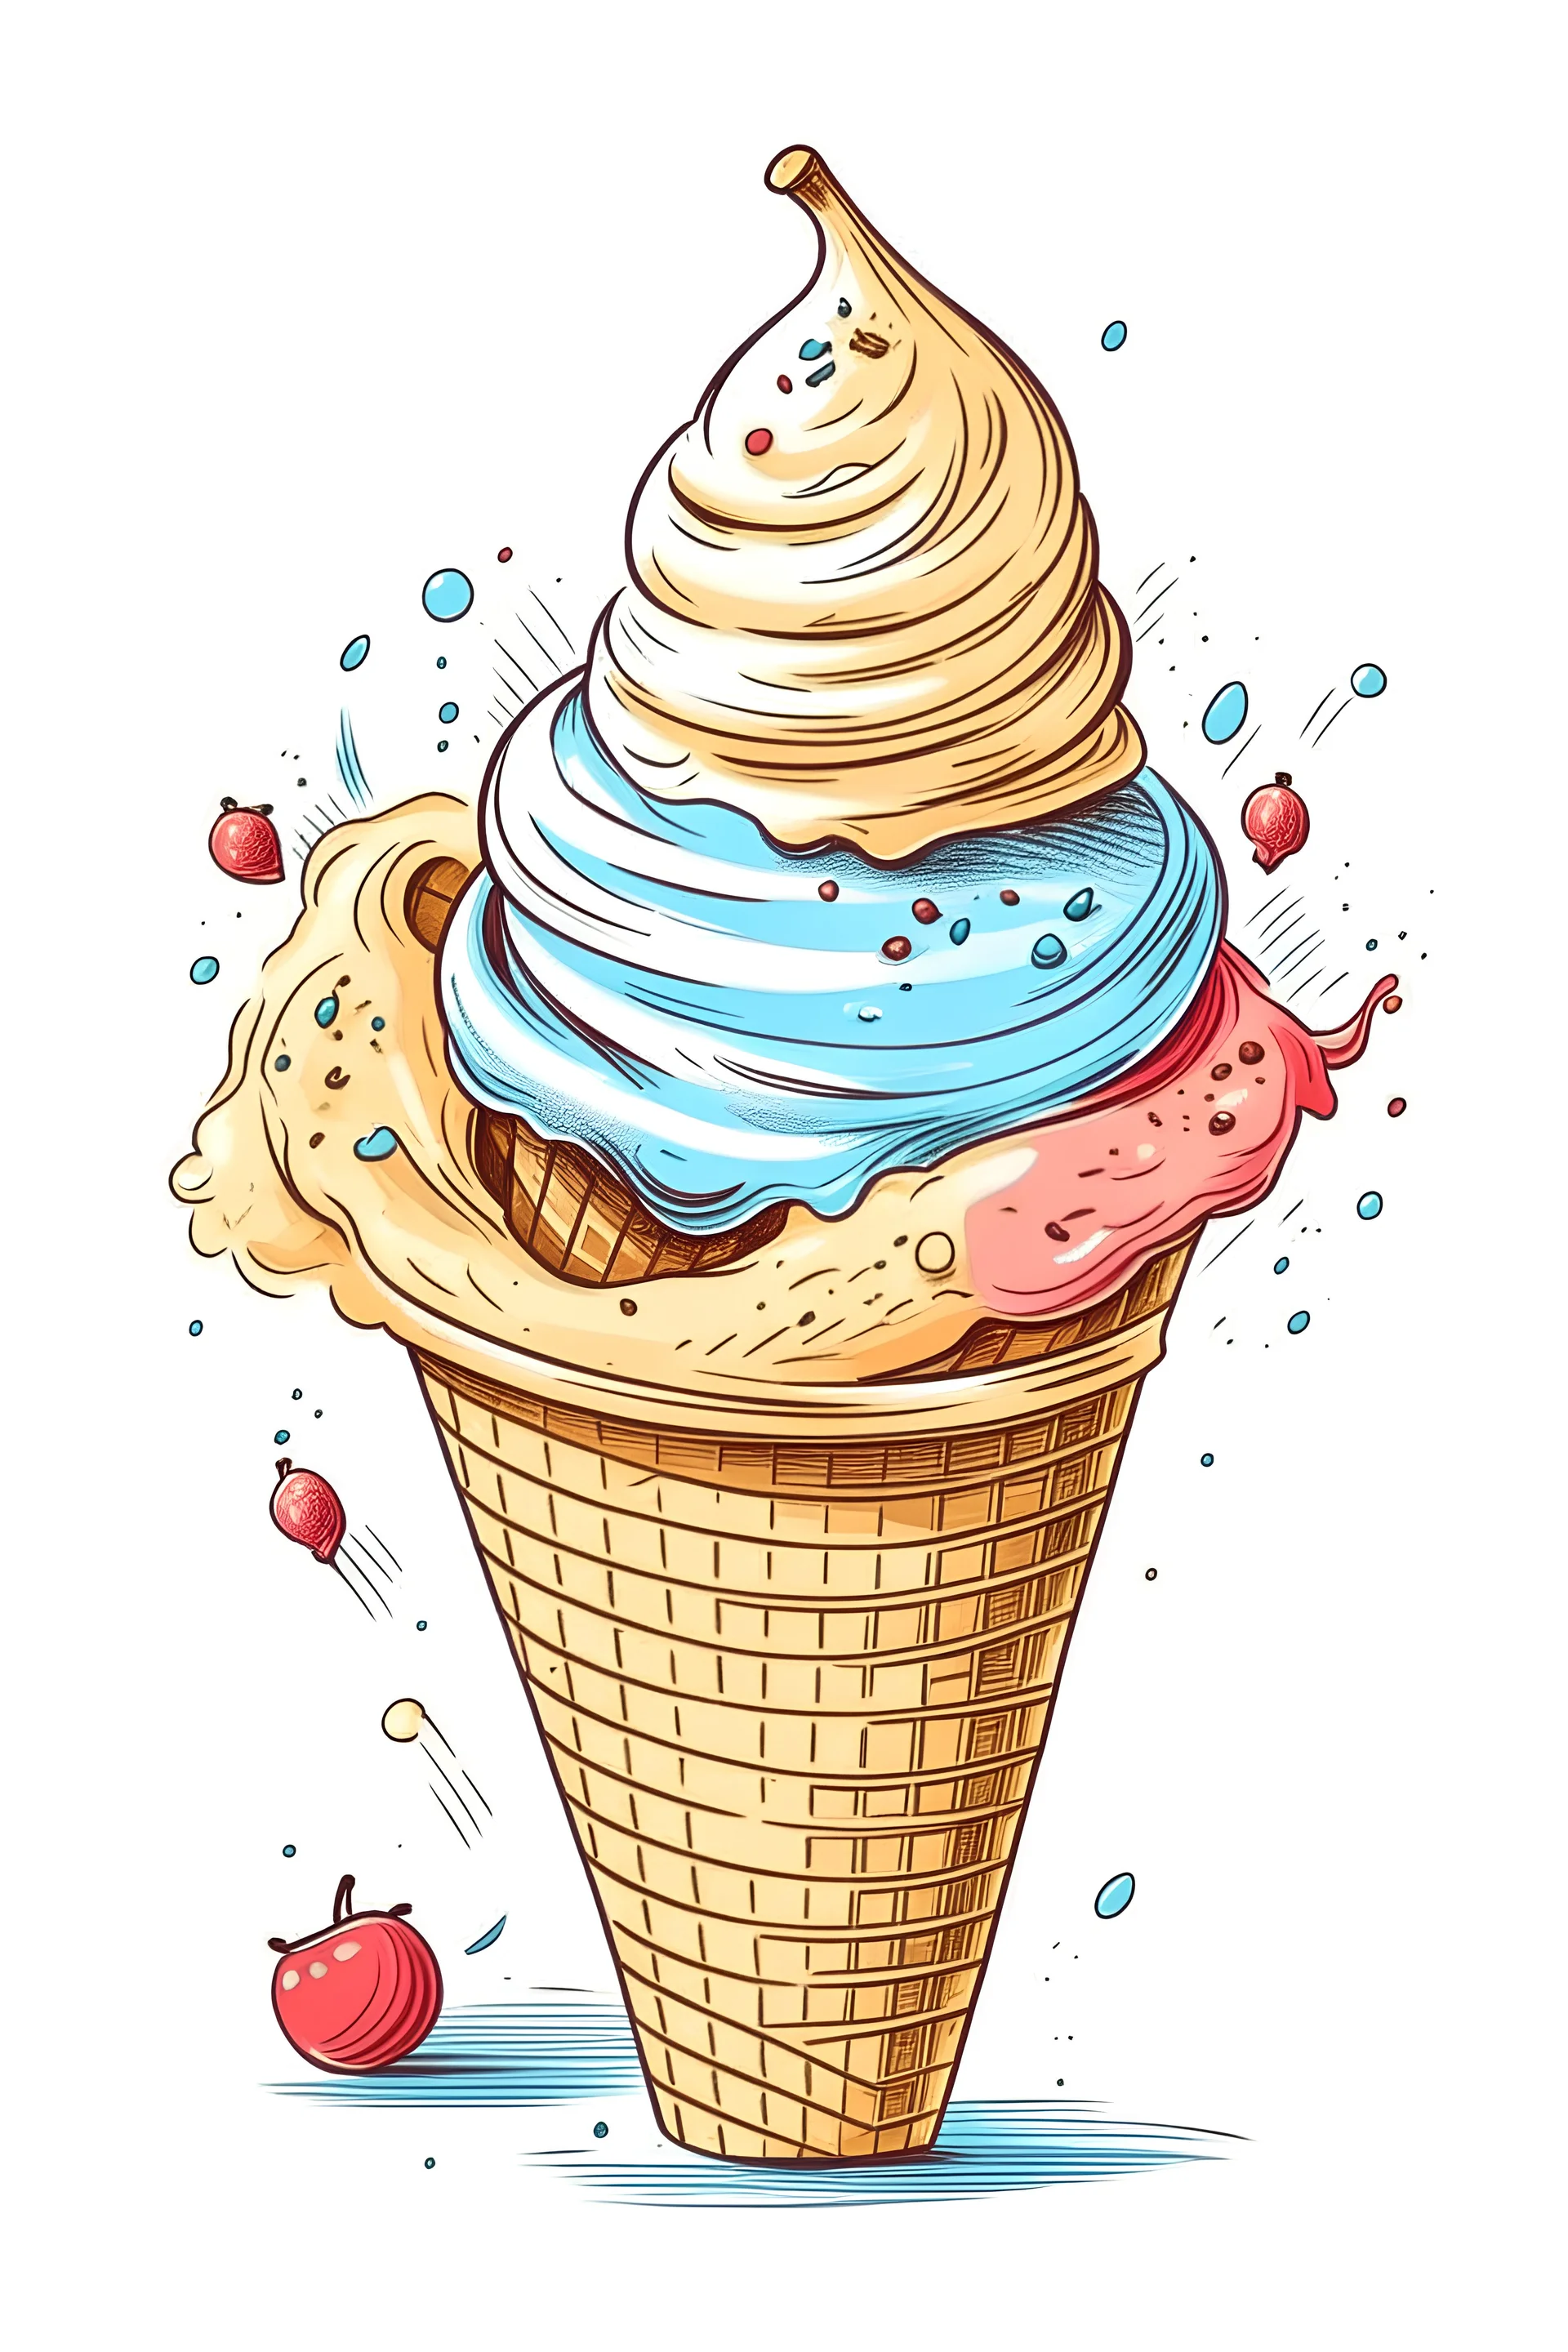 Soft ice cream in a cup of monochrome line drawing - Stock Illustration  [99792916] - PIXTA